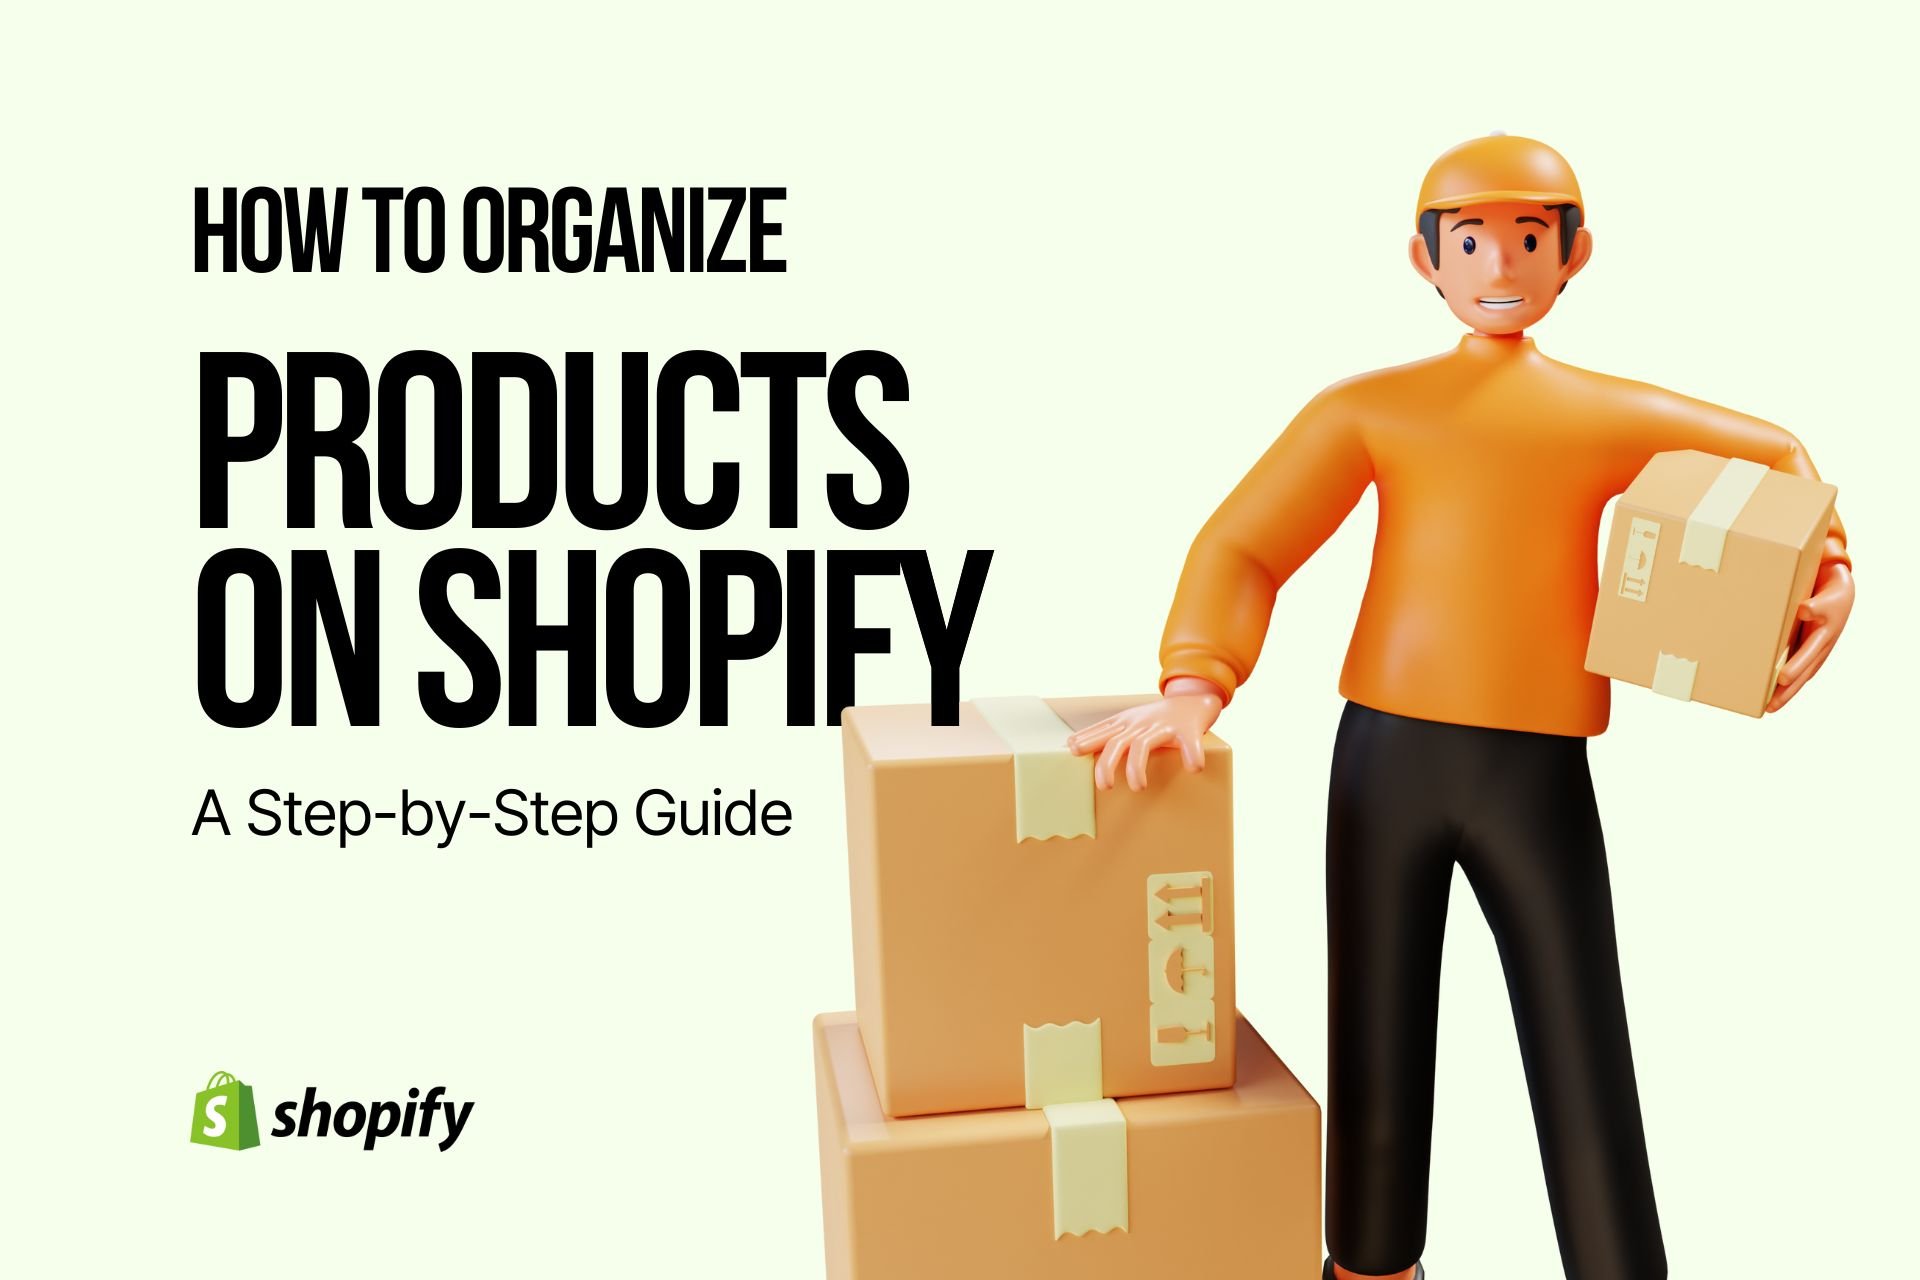 How to Organize Products on Shopify: A Step-by-Step Guide